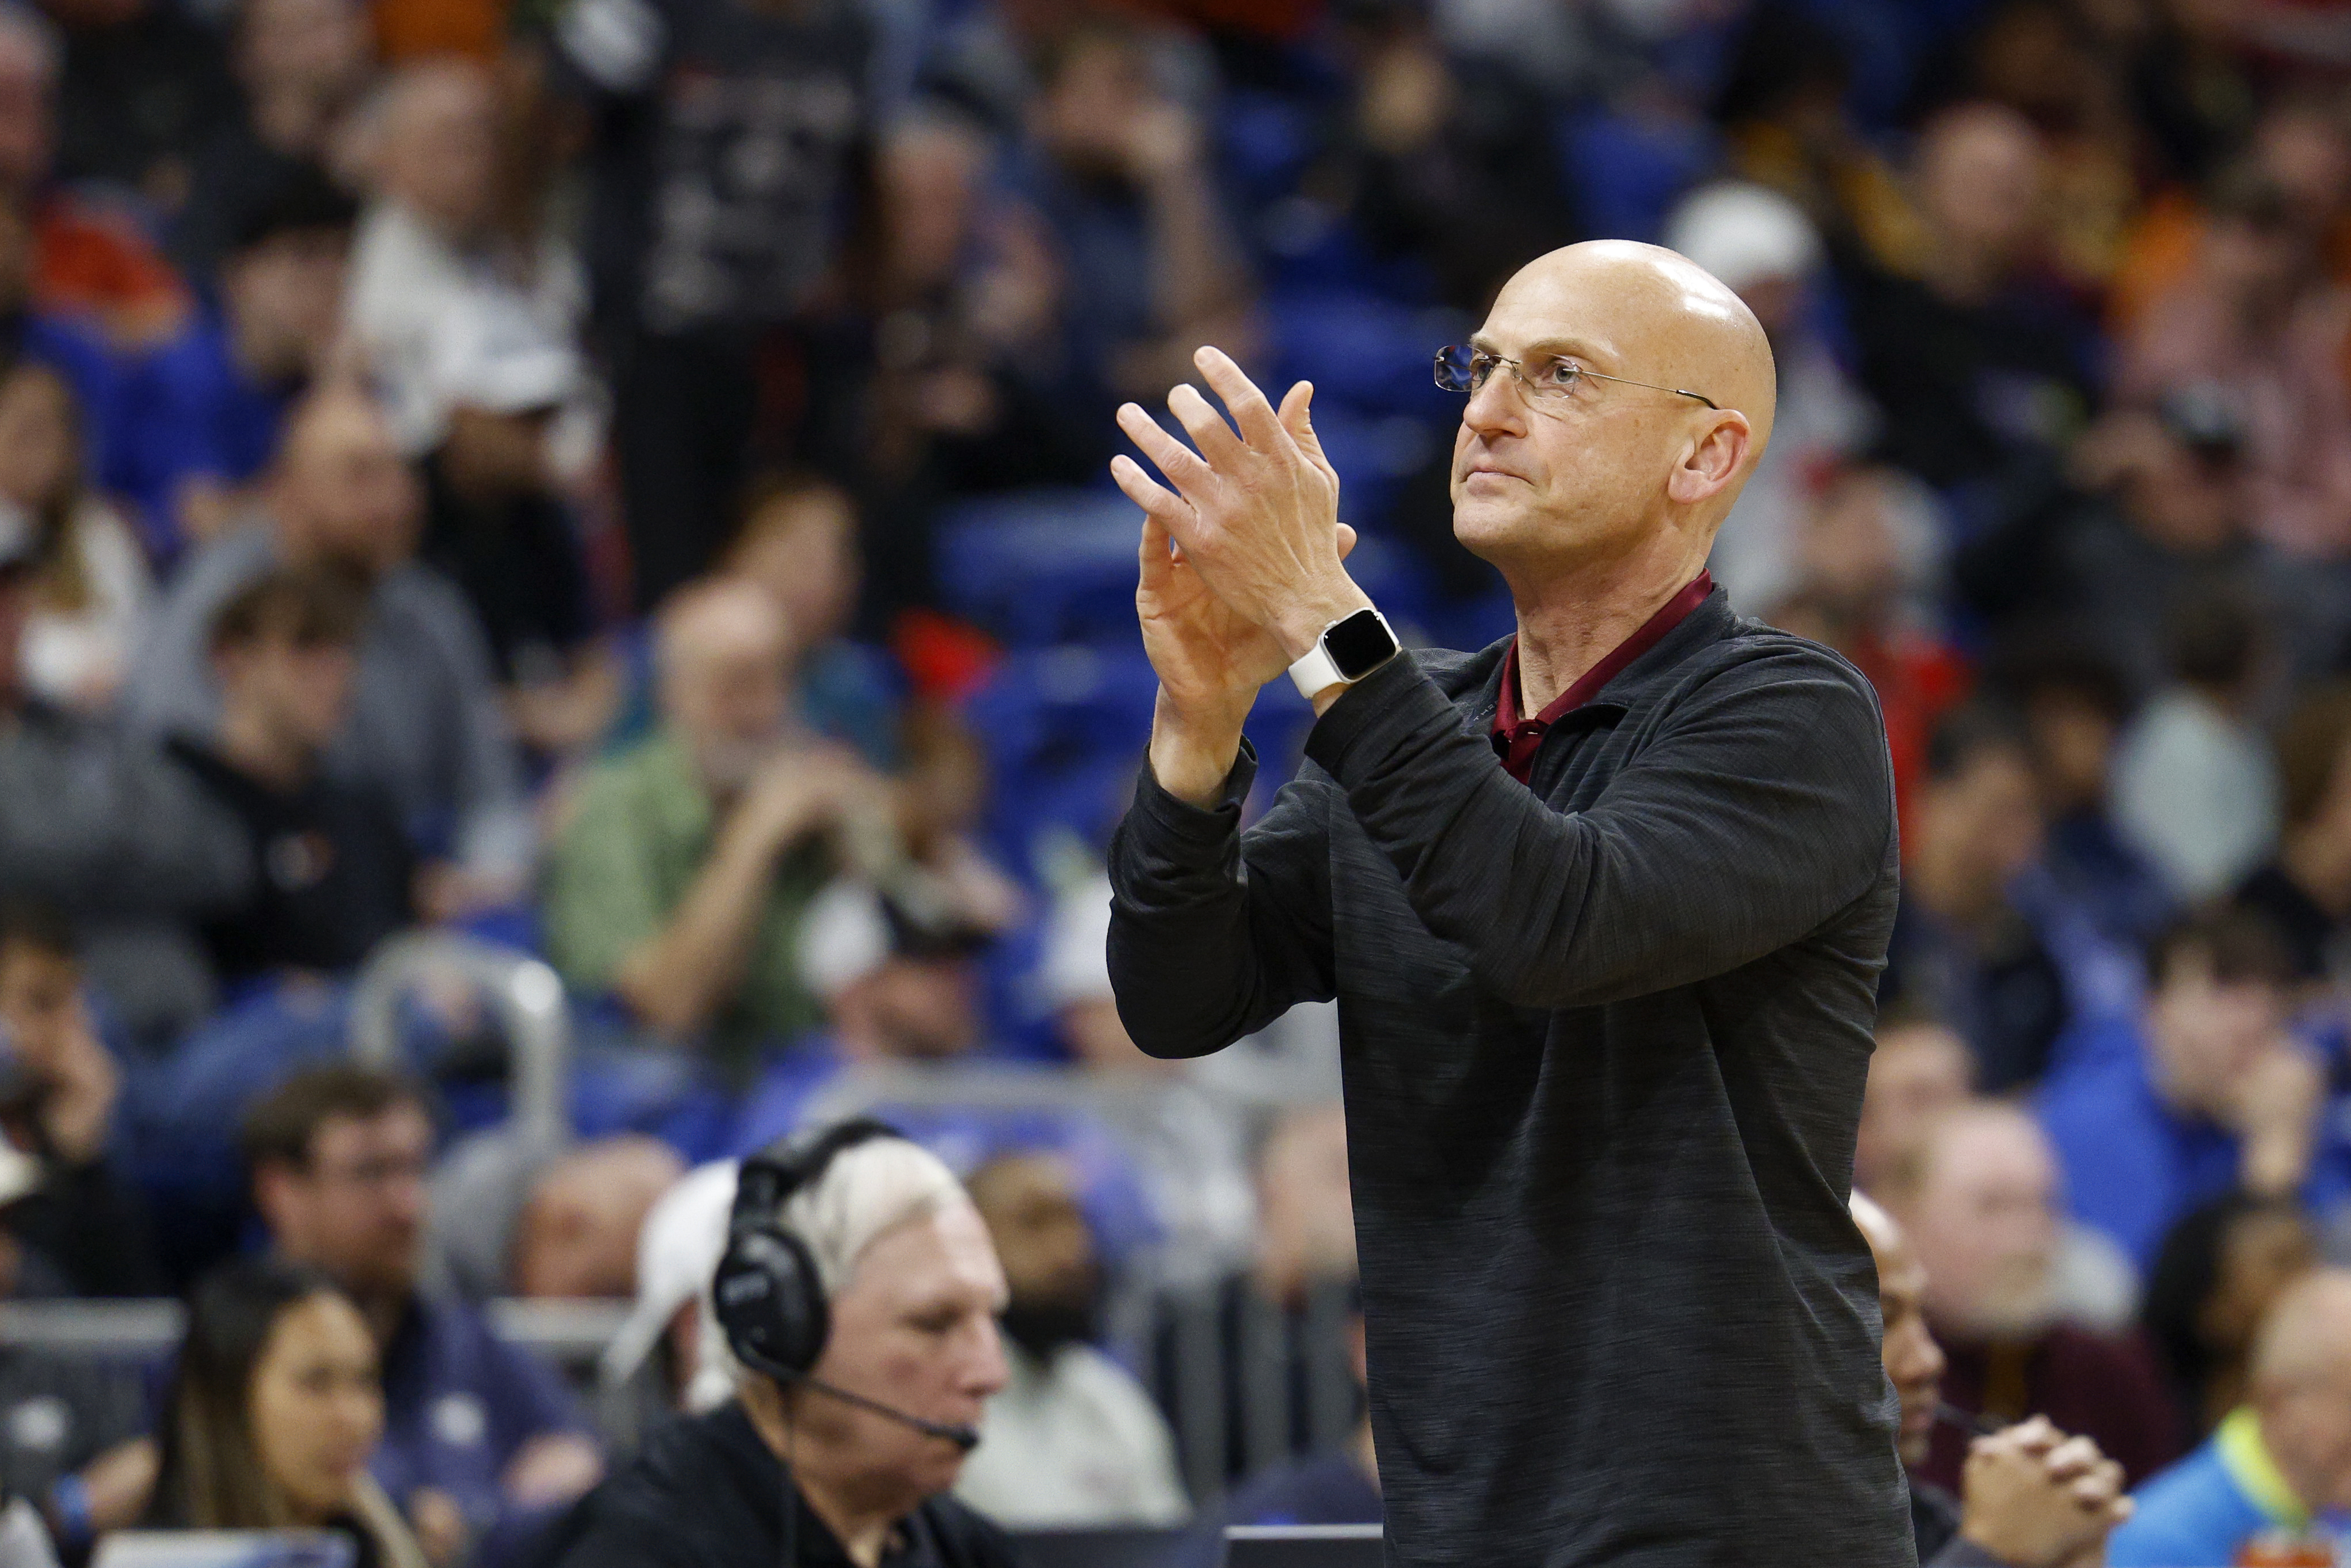 Mansfield Timberview boys basketball coach Duane Gregory retires after  state runner-up finish